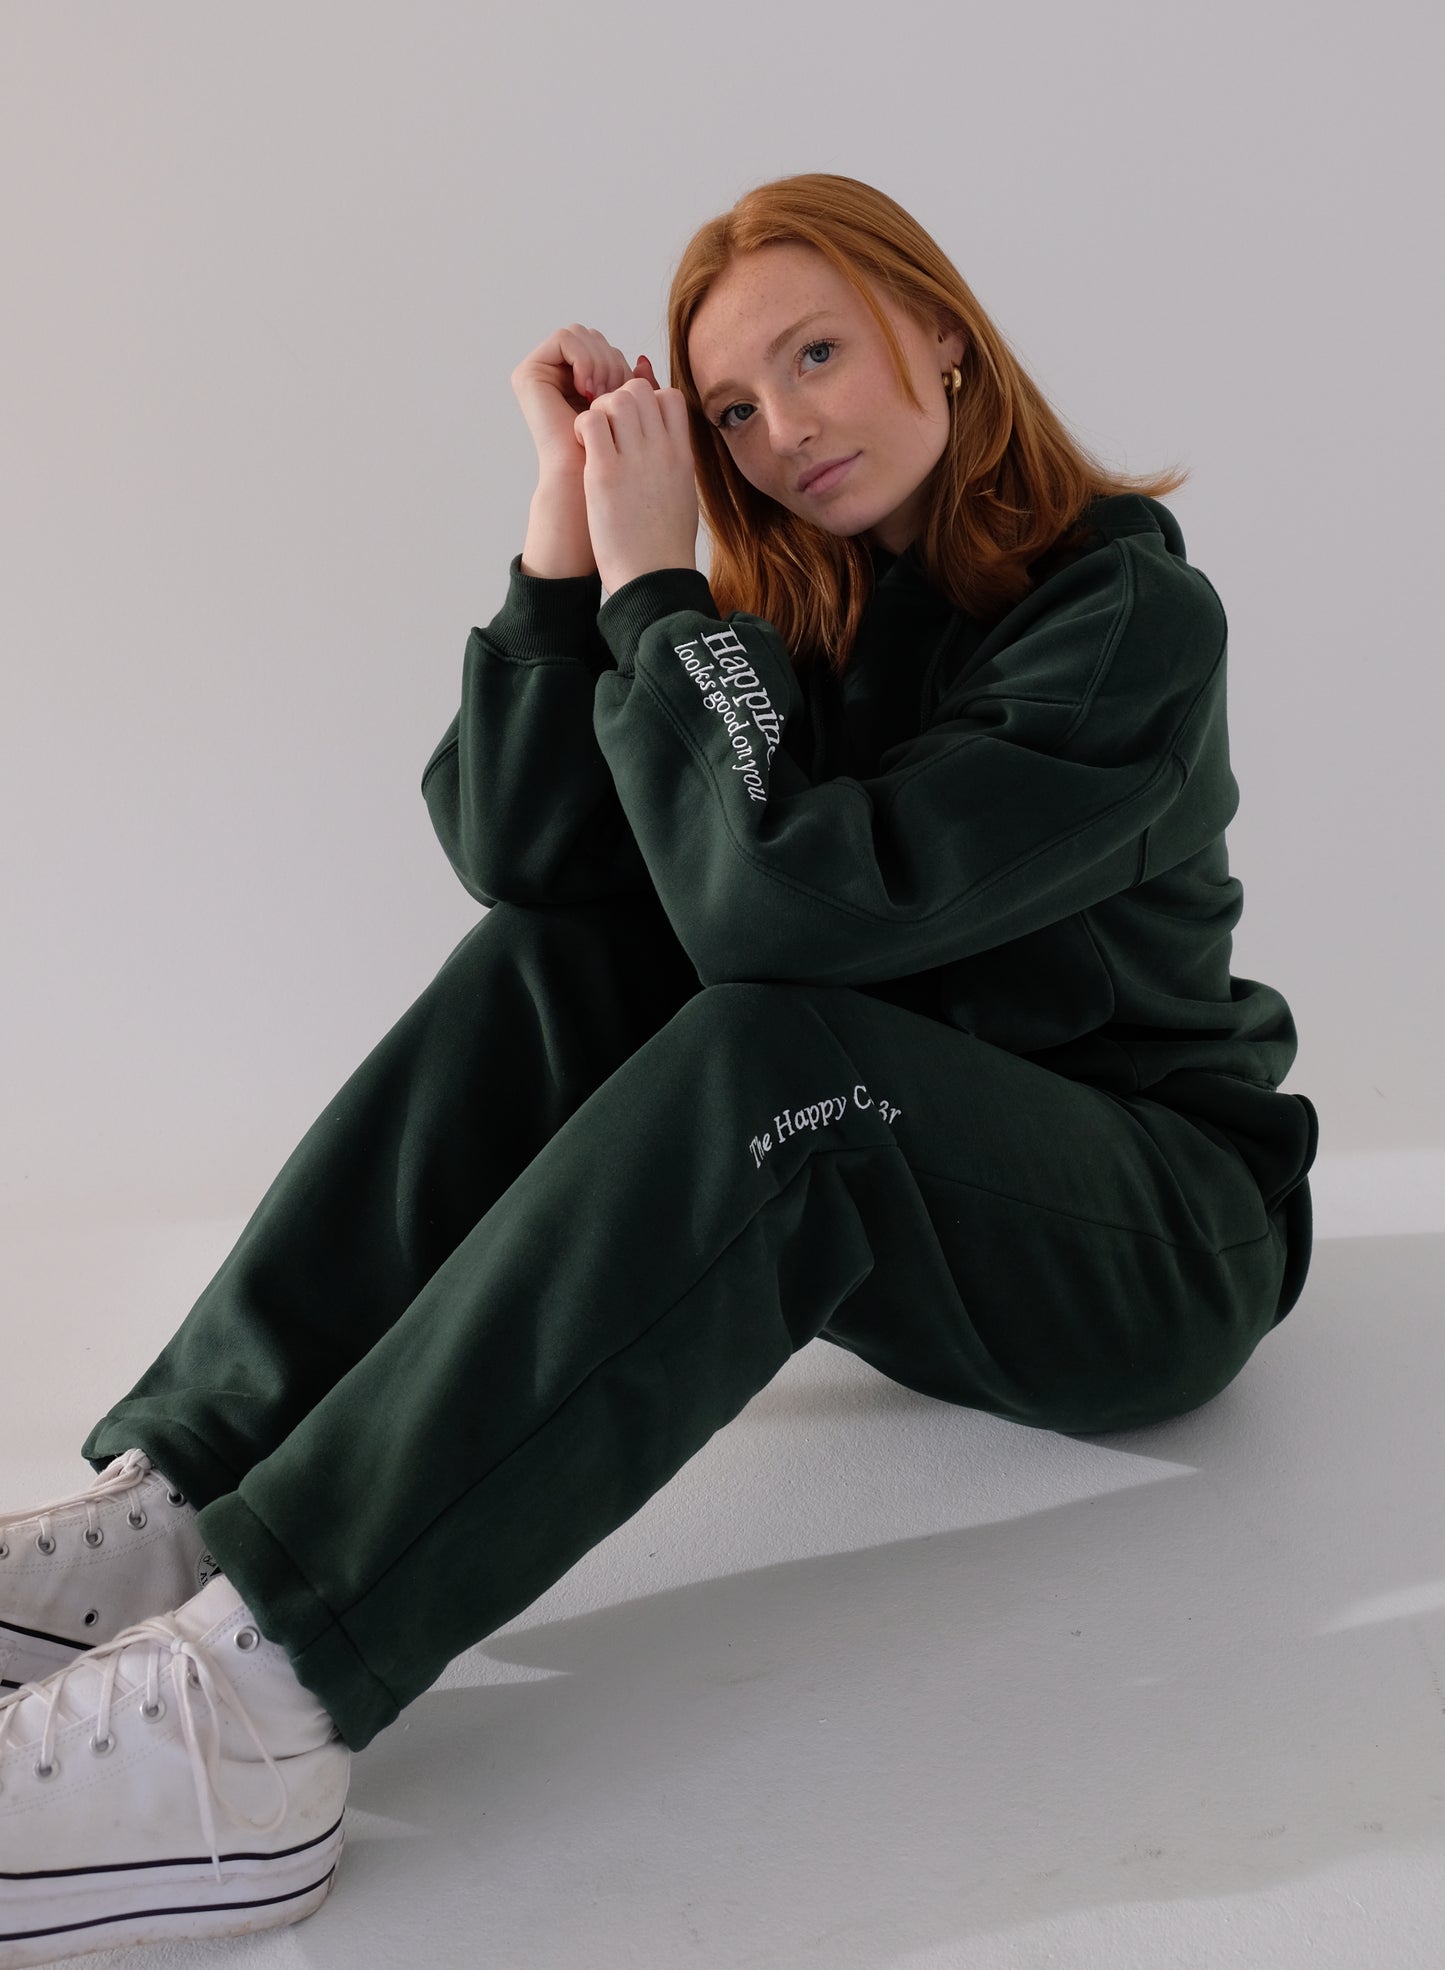 Happiness Hoodie - Forest Green